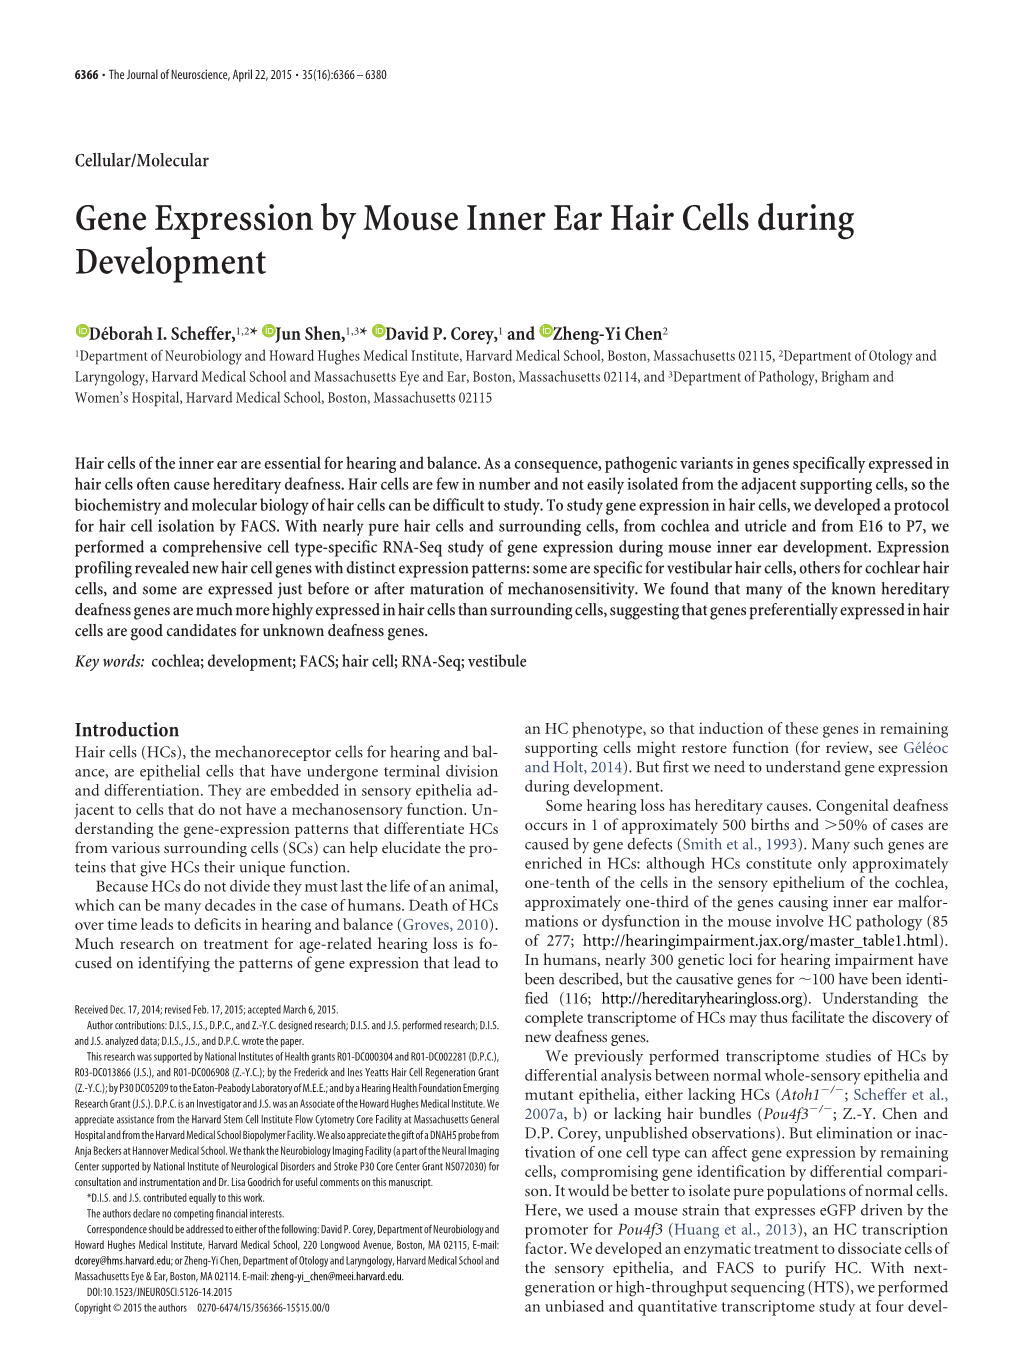 Gene Expression by Mouse Inner Ear Hair Cells During Development